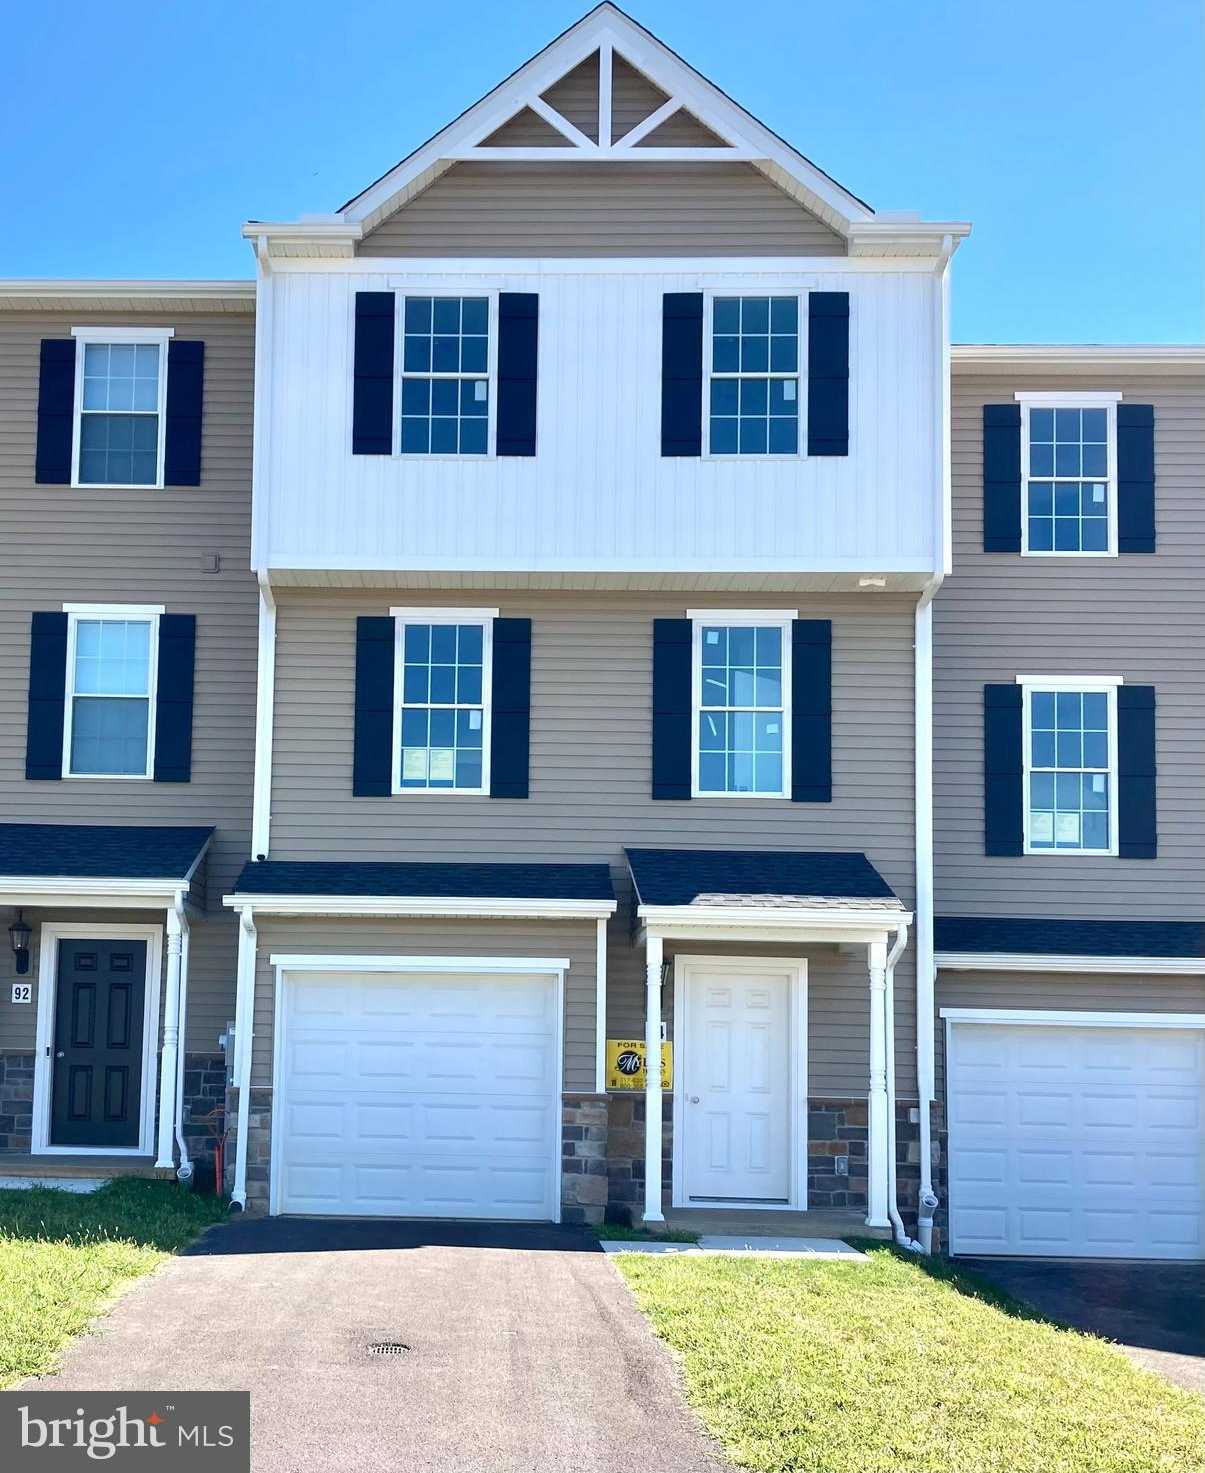 View HANOVER, PA 17331 townhome